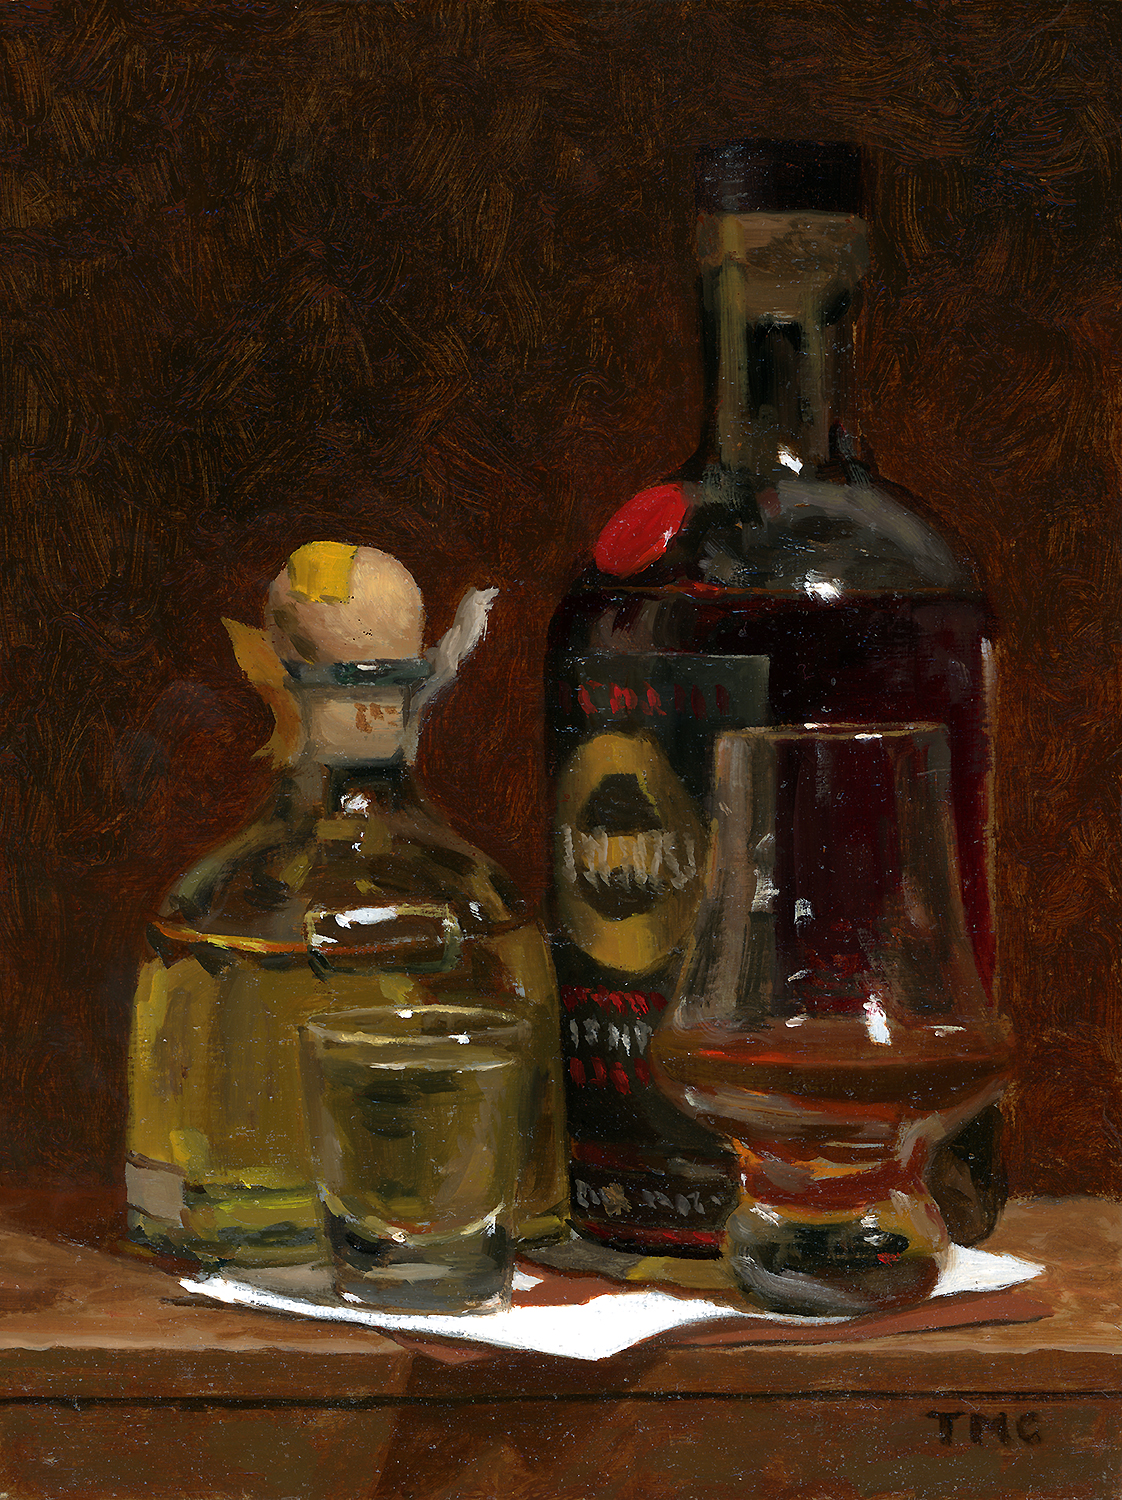 A painting with glasses and a bottle of alcohol - Todd M. Casey